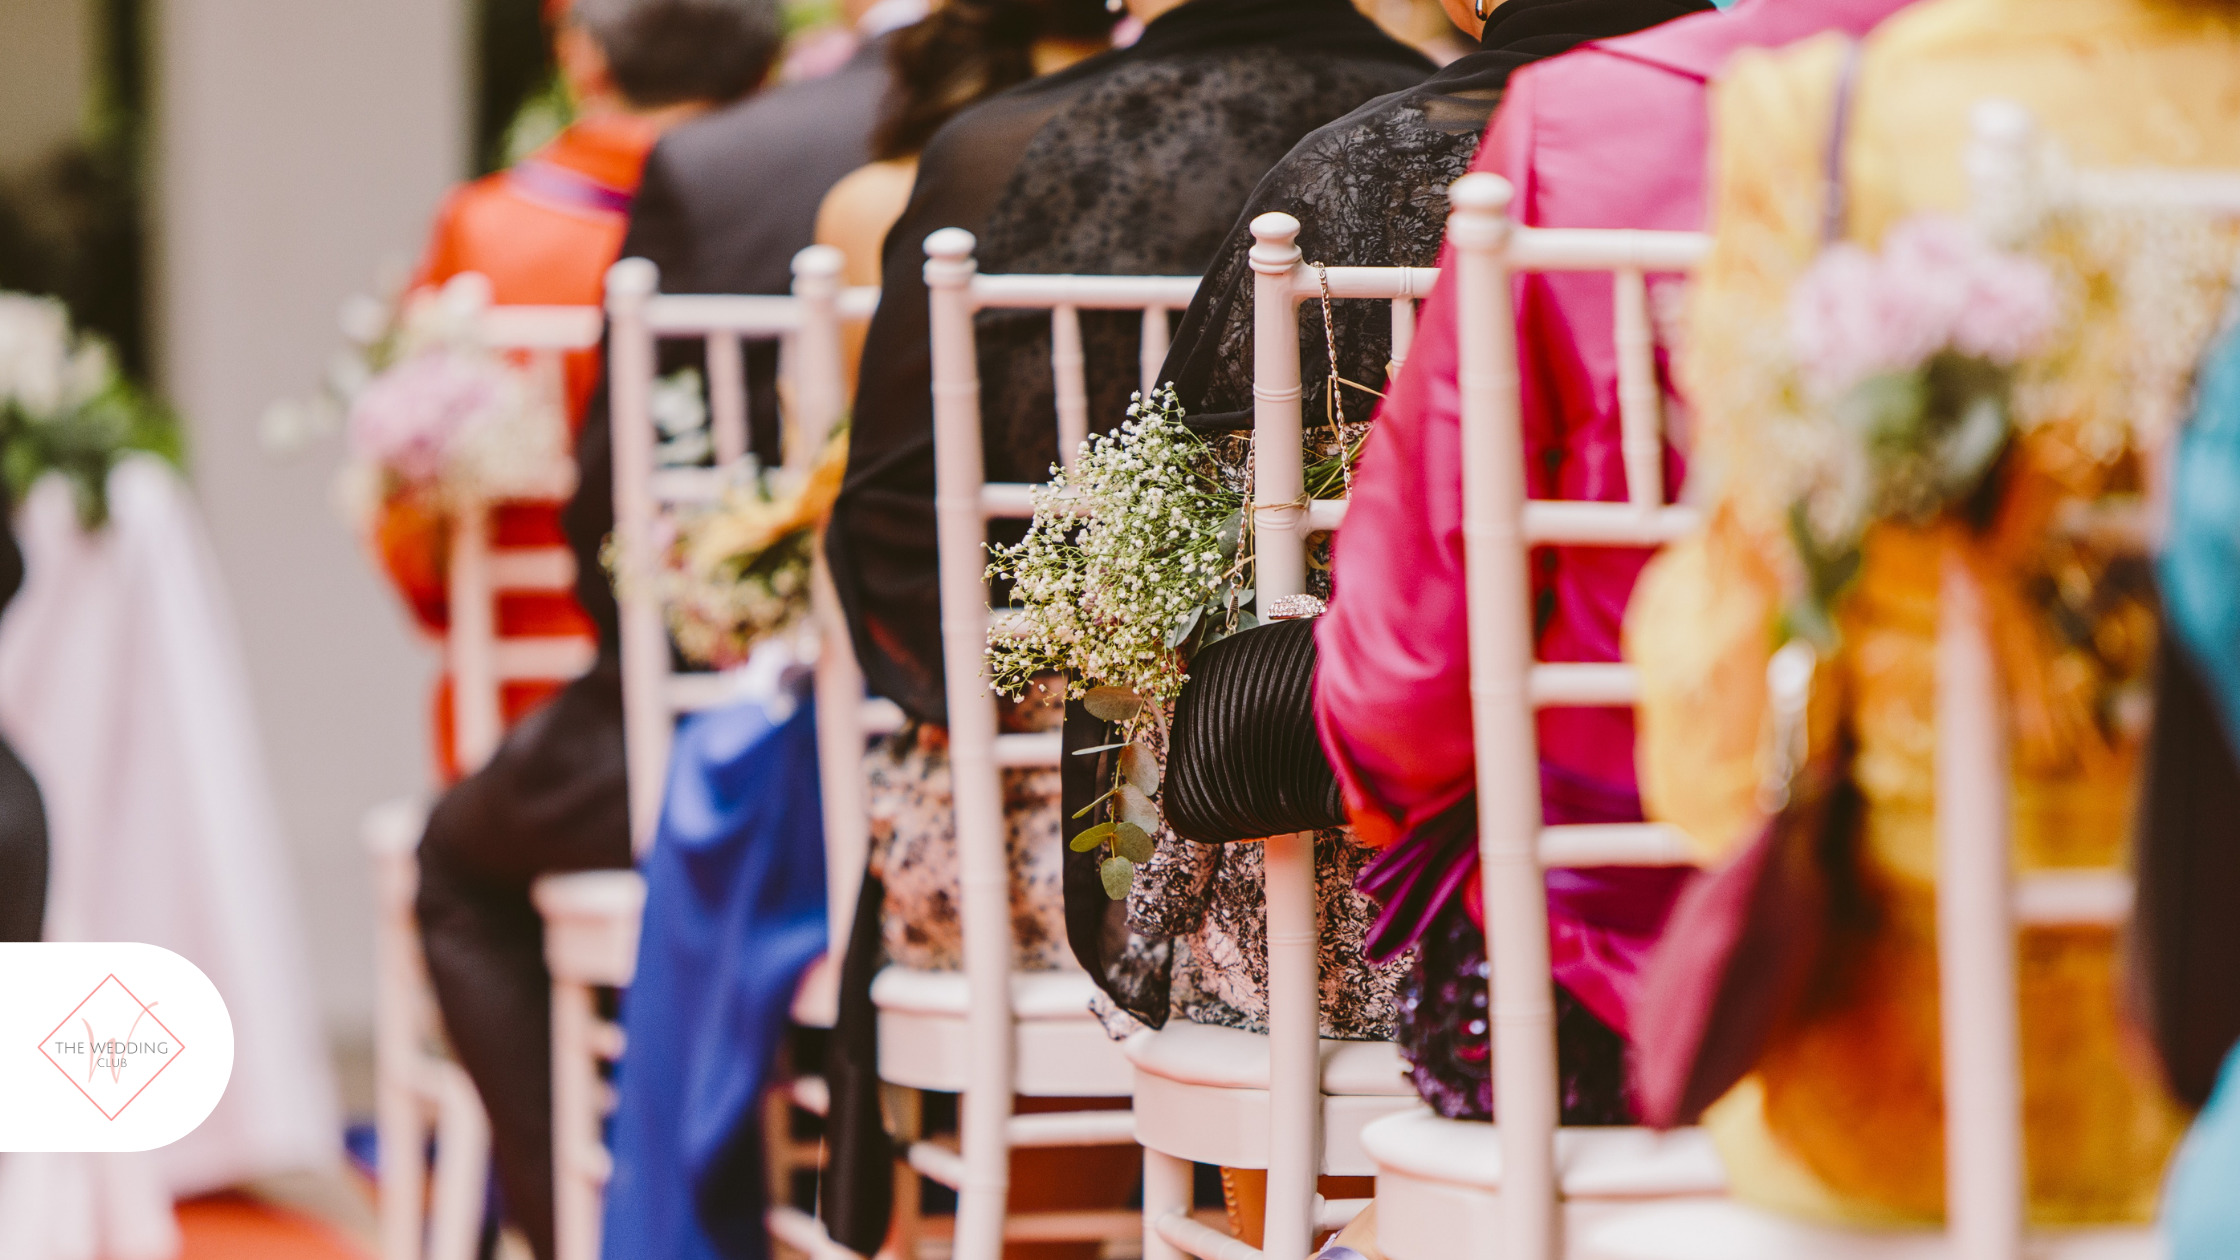 How to make a wedding guest list